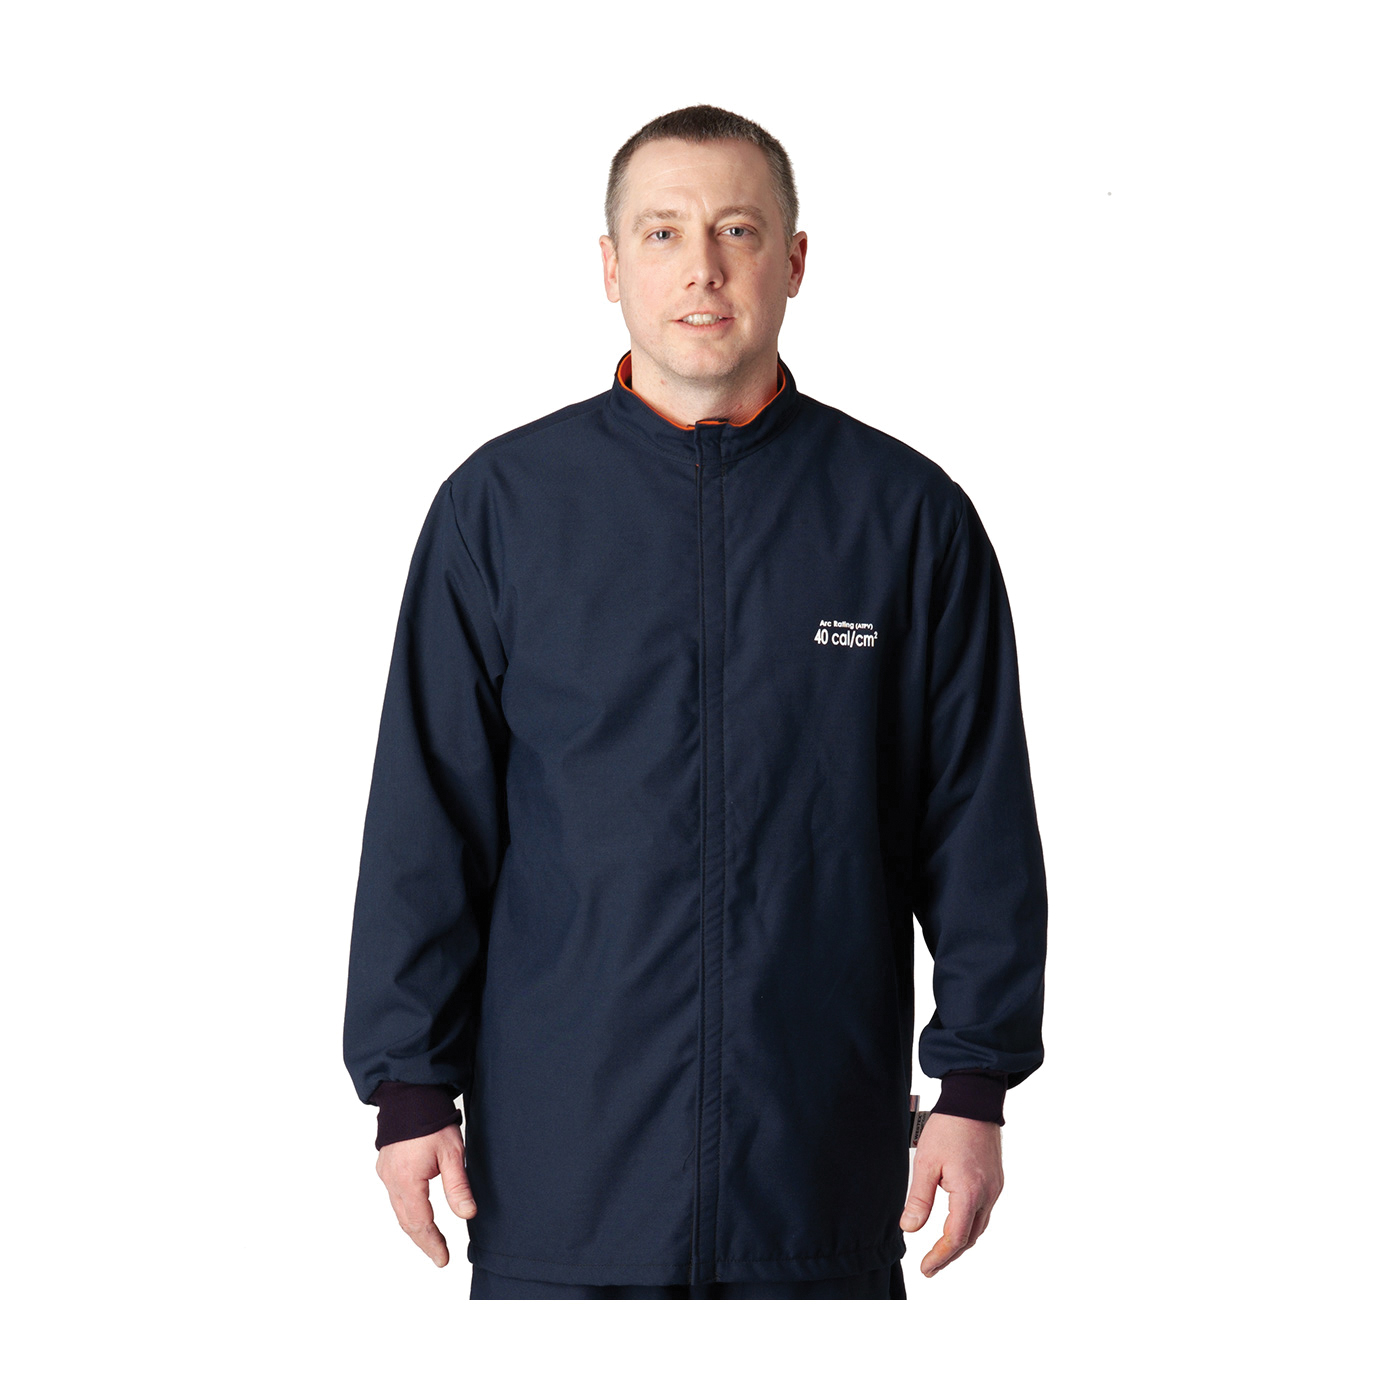 PIP® 9100-524ULT/2X Ultra Light Arc and Flame Resistant Jacket, 2XL, Navy Blue, DuPont™ Protera®/Westex® Ultrasoft, 52 to 54 in Chest, Resists: Arc and Flame, ASTM F1506-10a, ASTM F2178-12